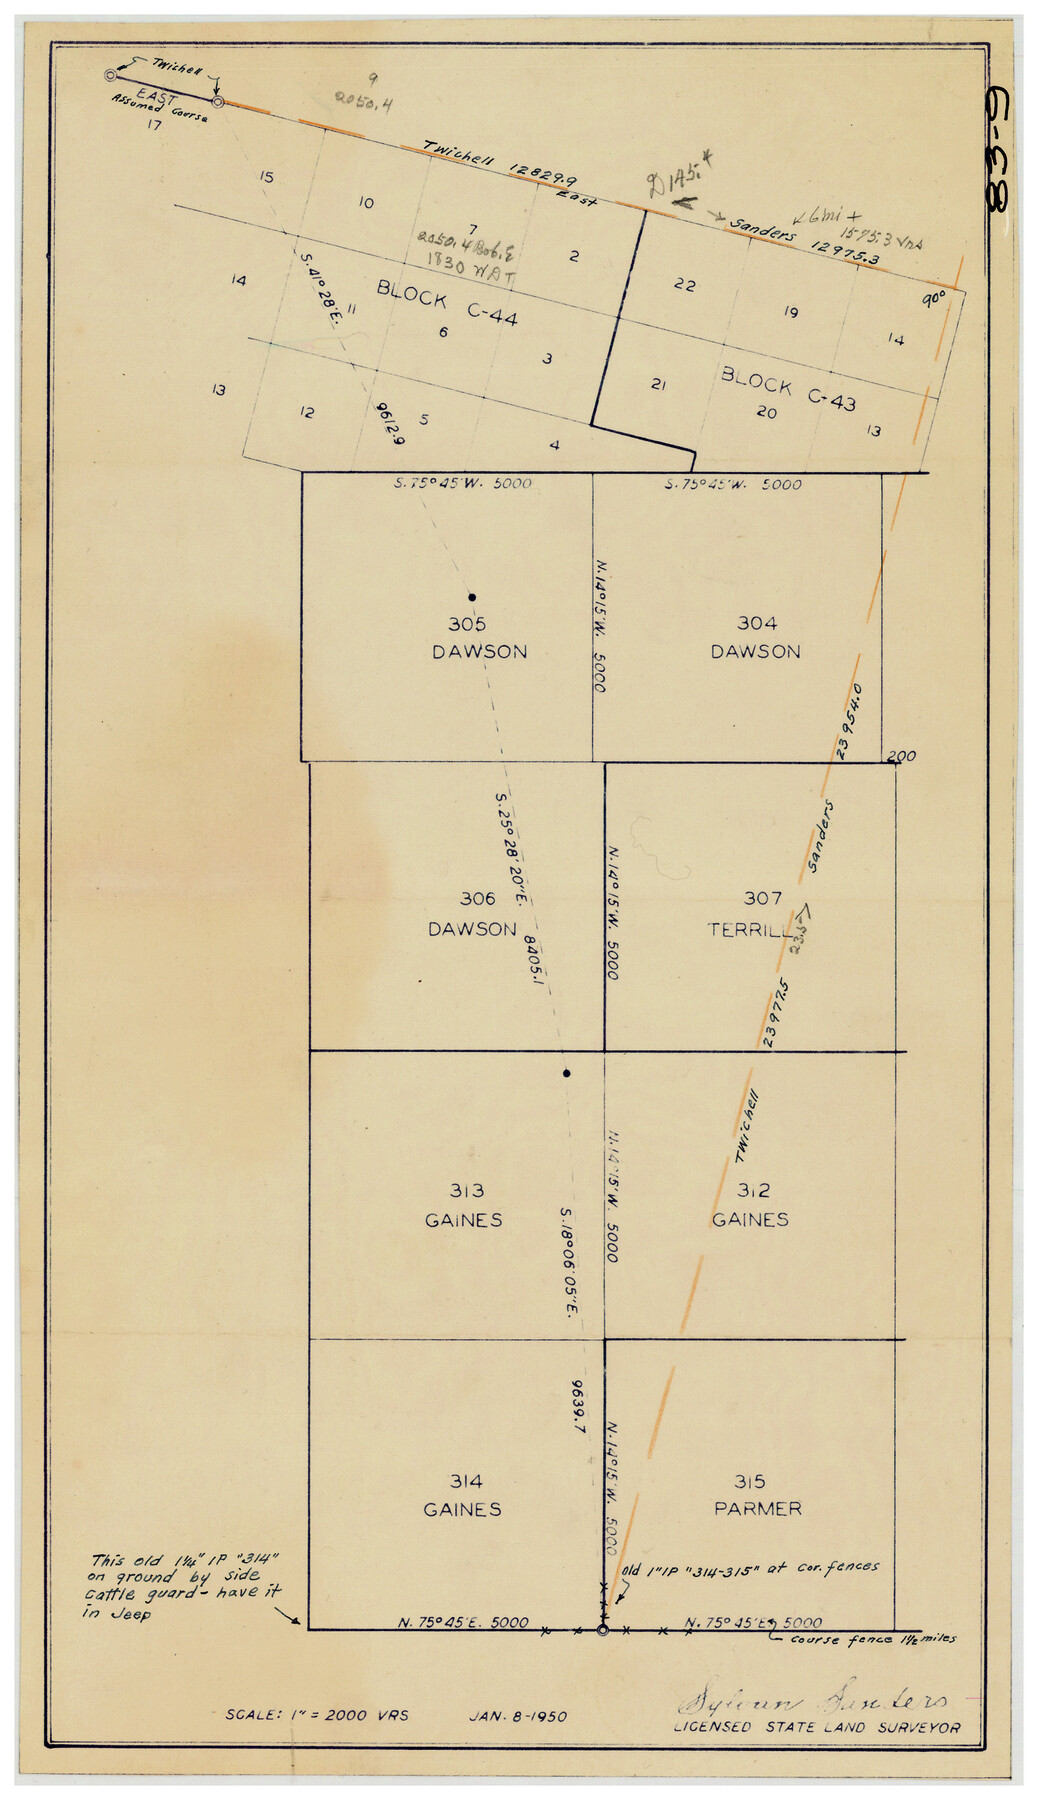 90813, [PSL Blocks C43 and C44 and Dawson and Gaines County School Lands], Twichell Survey Records